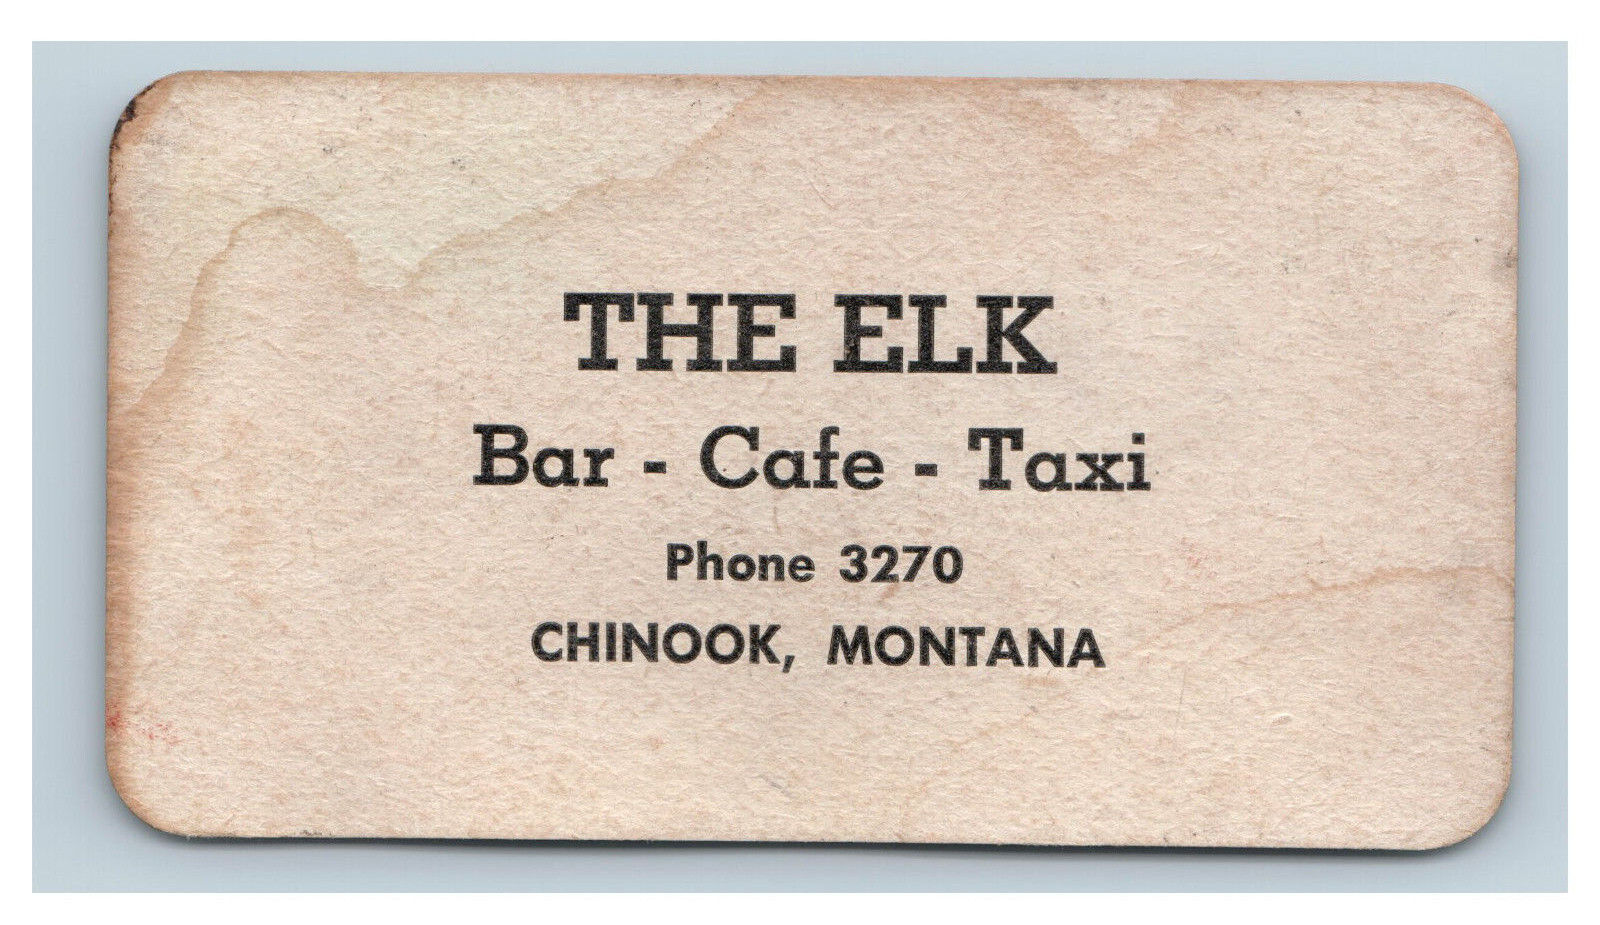 1950s The Elk Chinook MT Business Card Advertising Risque Naughty Comic Pilgrim